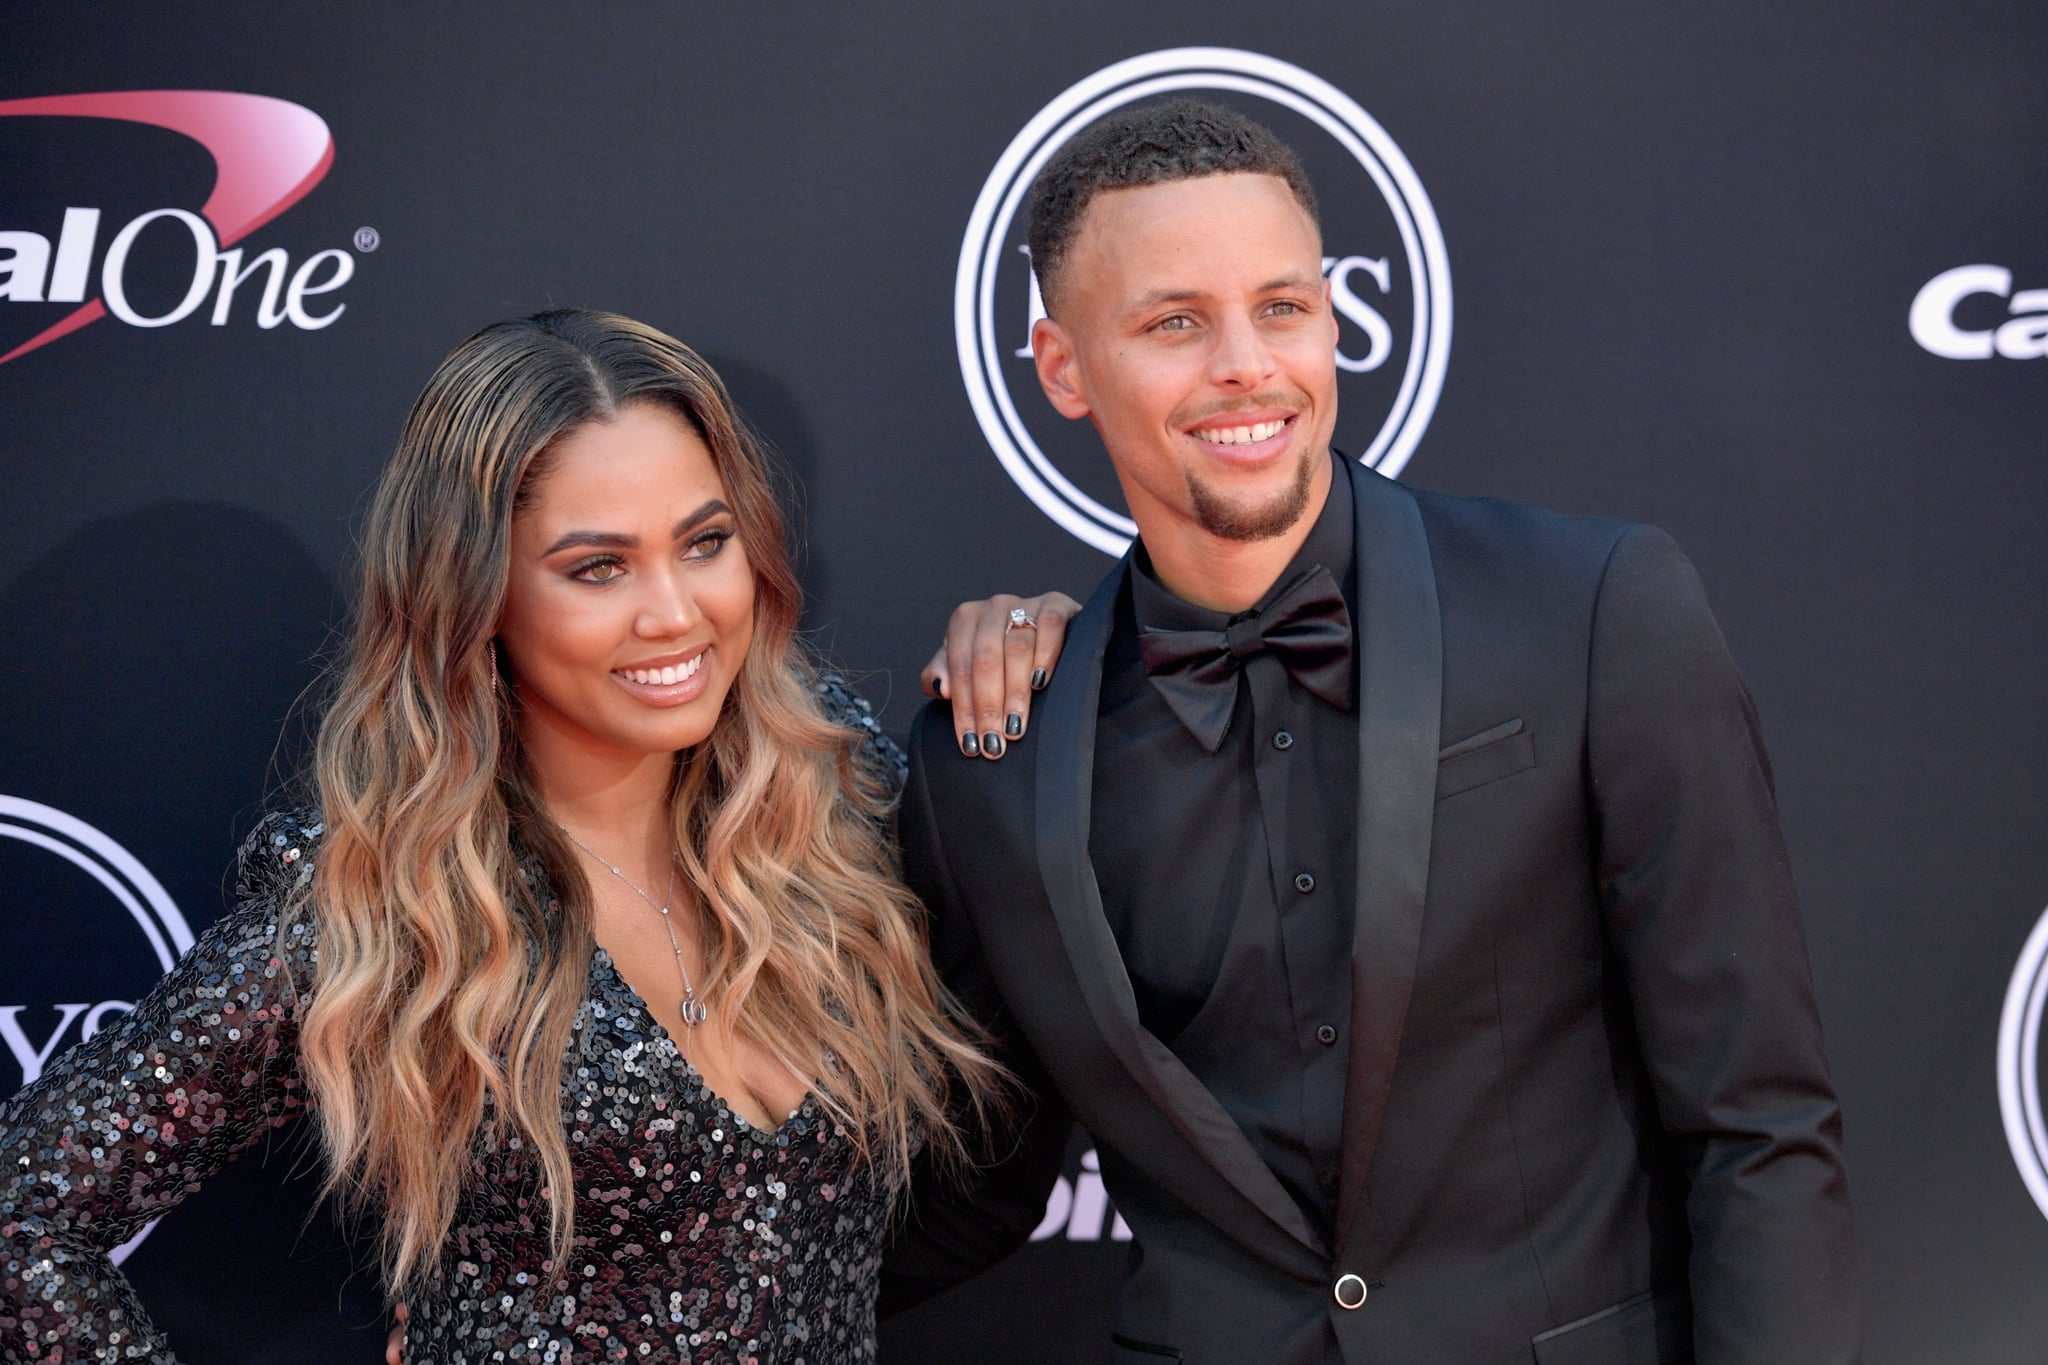 LOS ANGELES, CA - JULY 12:  NBA player Steph Curry (R) and Ayesha Curry attend The 2017 ESPYS at Microsoft Theater on July 12, 2017 in Los Angeles, California.  (Photo by Matt Winkelmeyer/Getty Images)